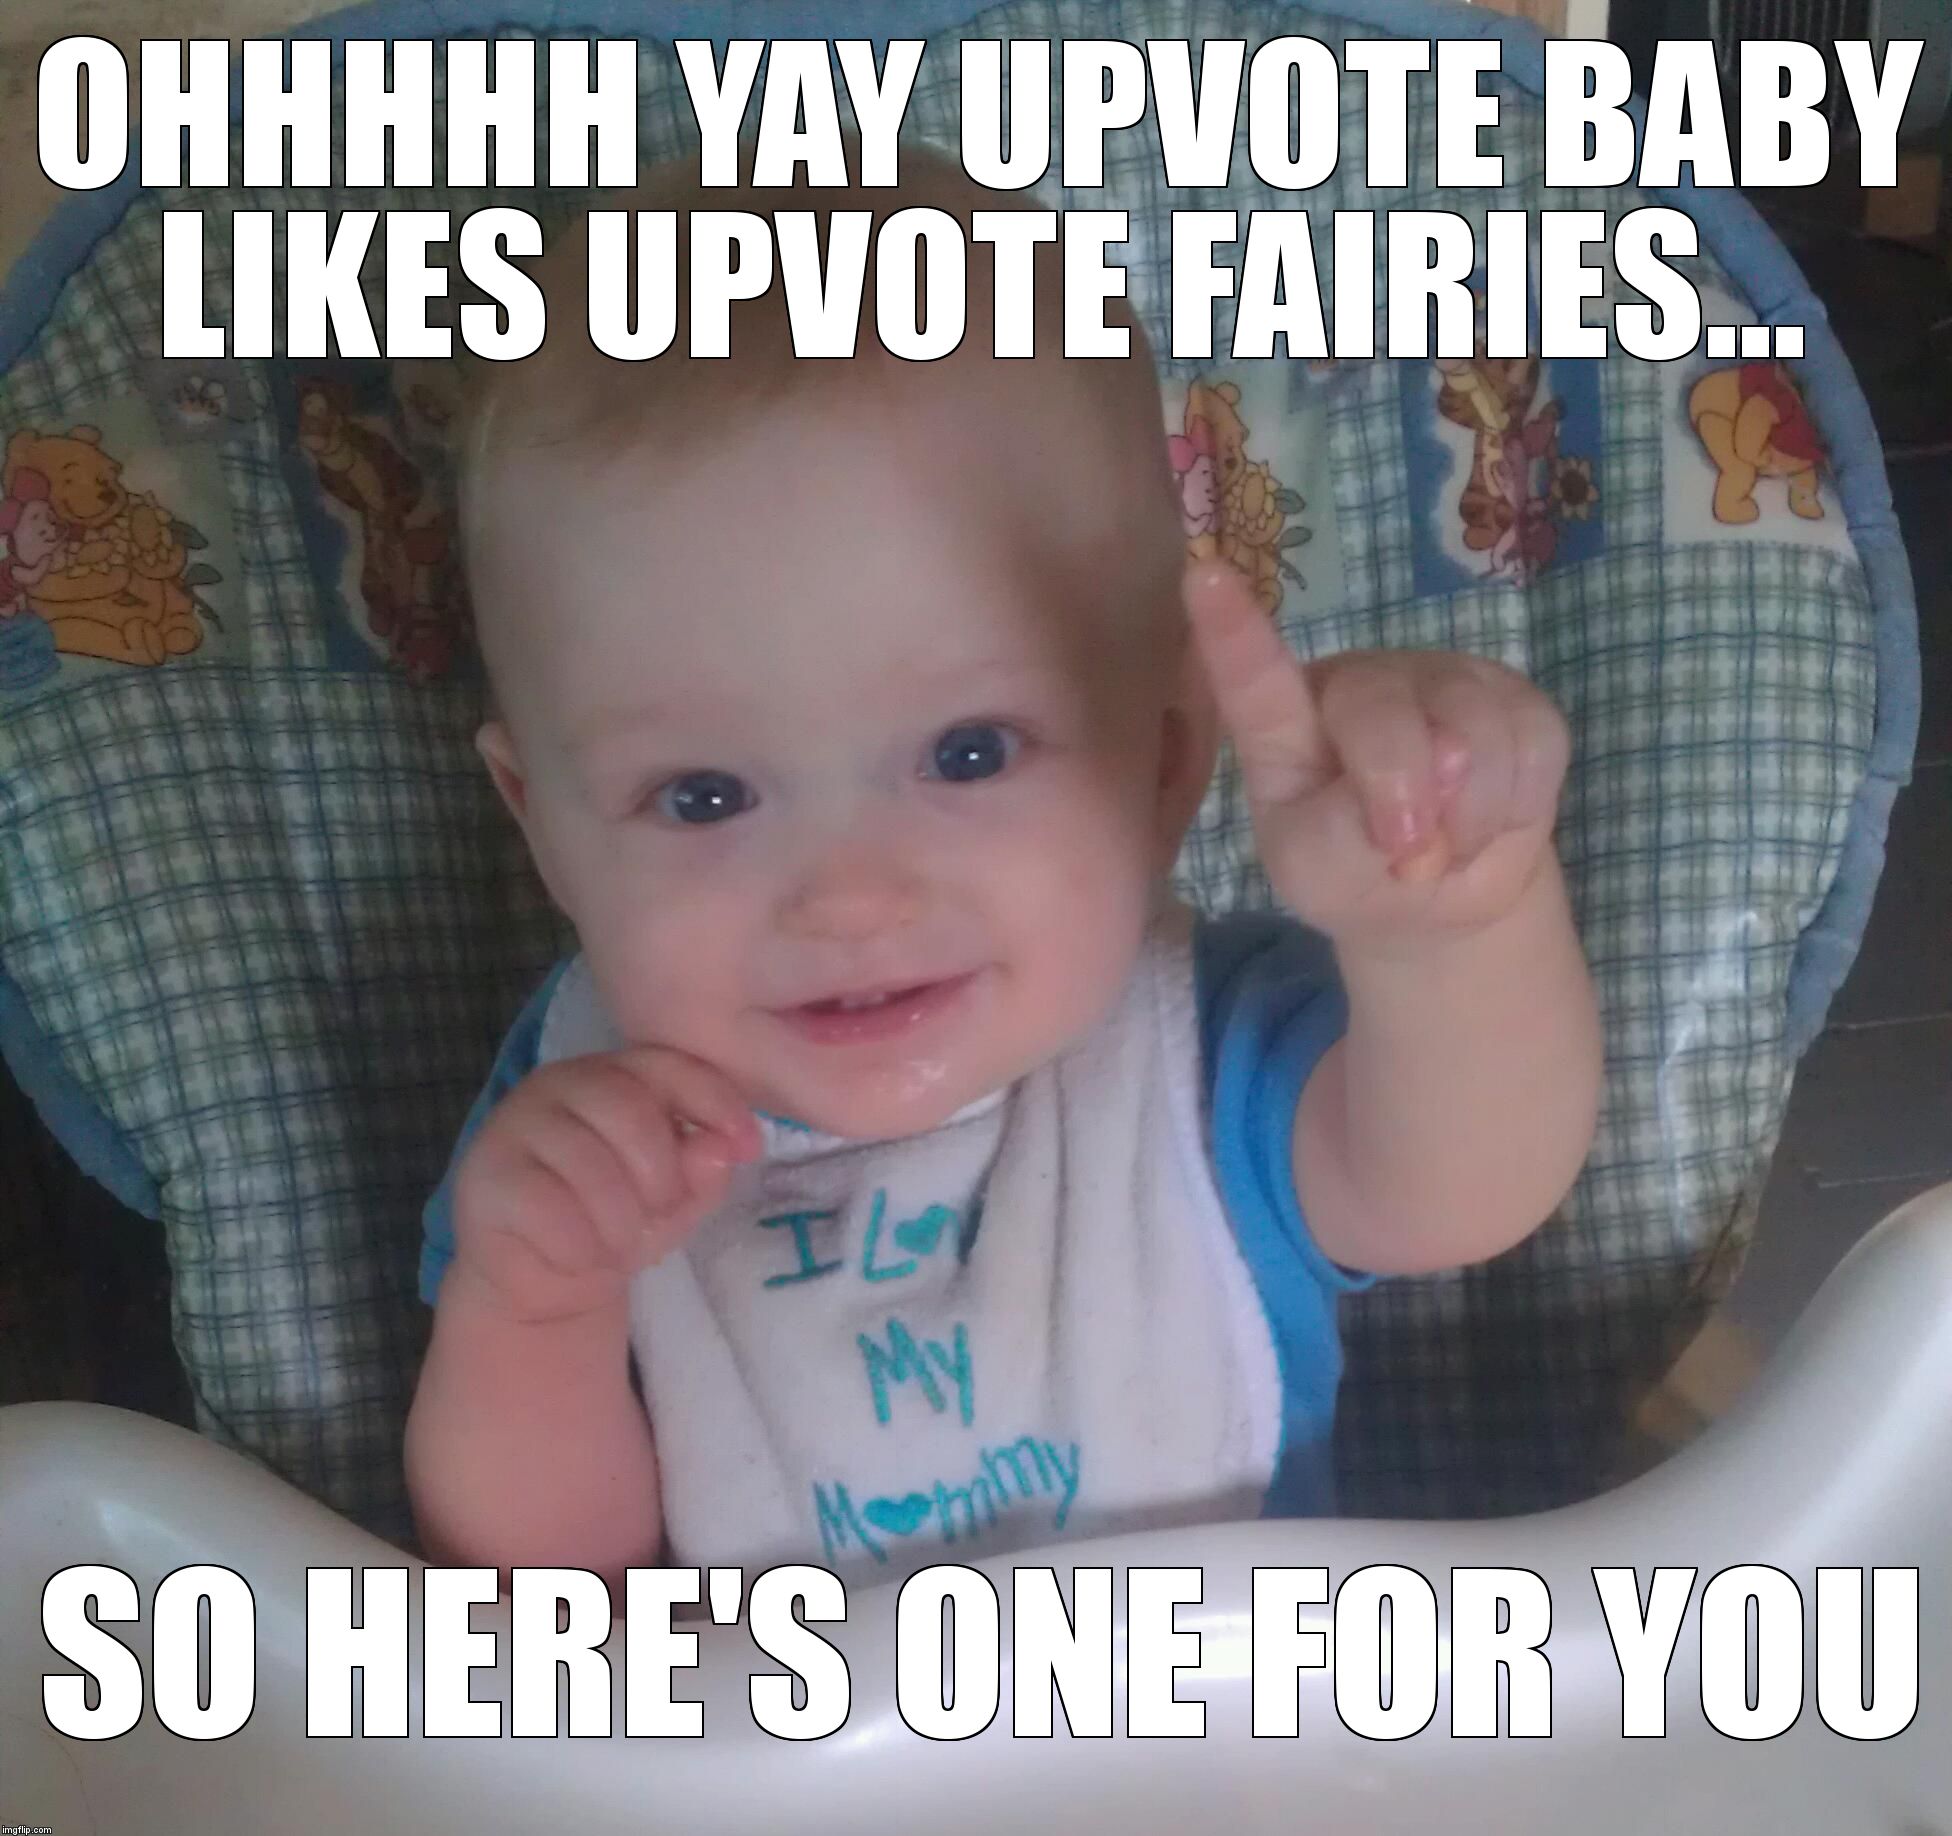 just one baby | OHHHHH YAY UPVOTE BABY LIKES UPVOTE FAIRIES... SO HERE'S ONE FOR YOU | image tagged in just one baby | made w/ Imgflip meme maker